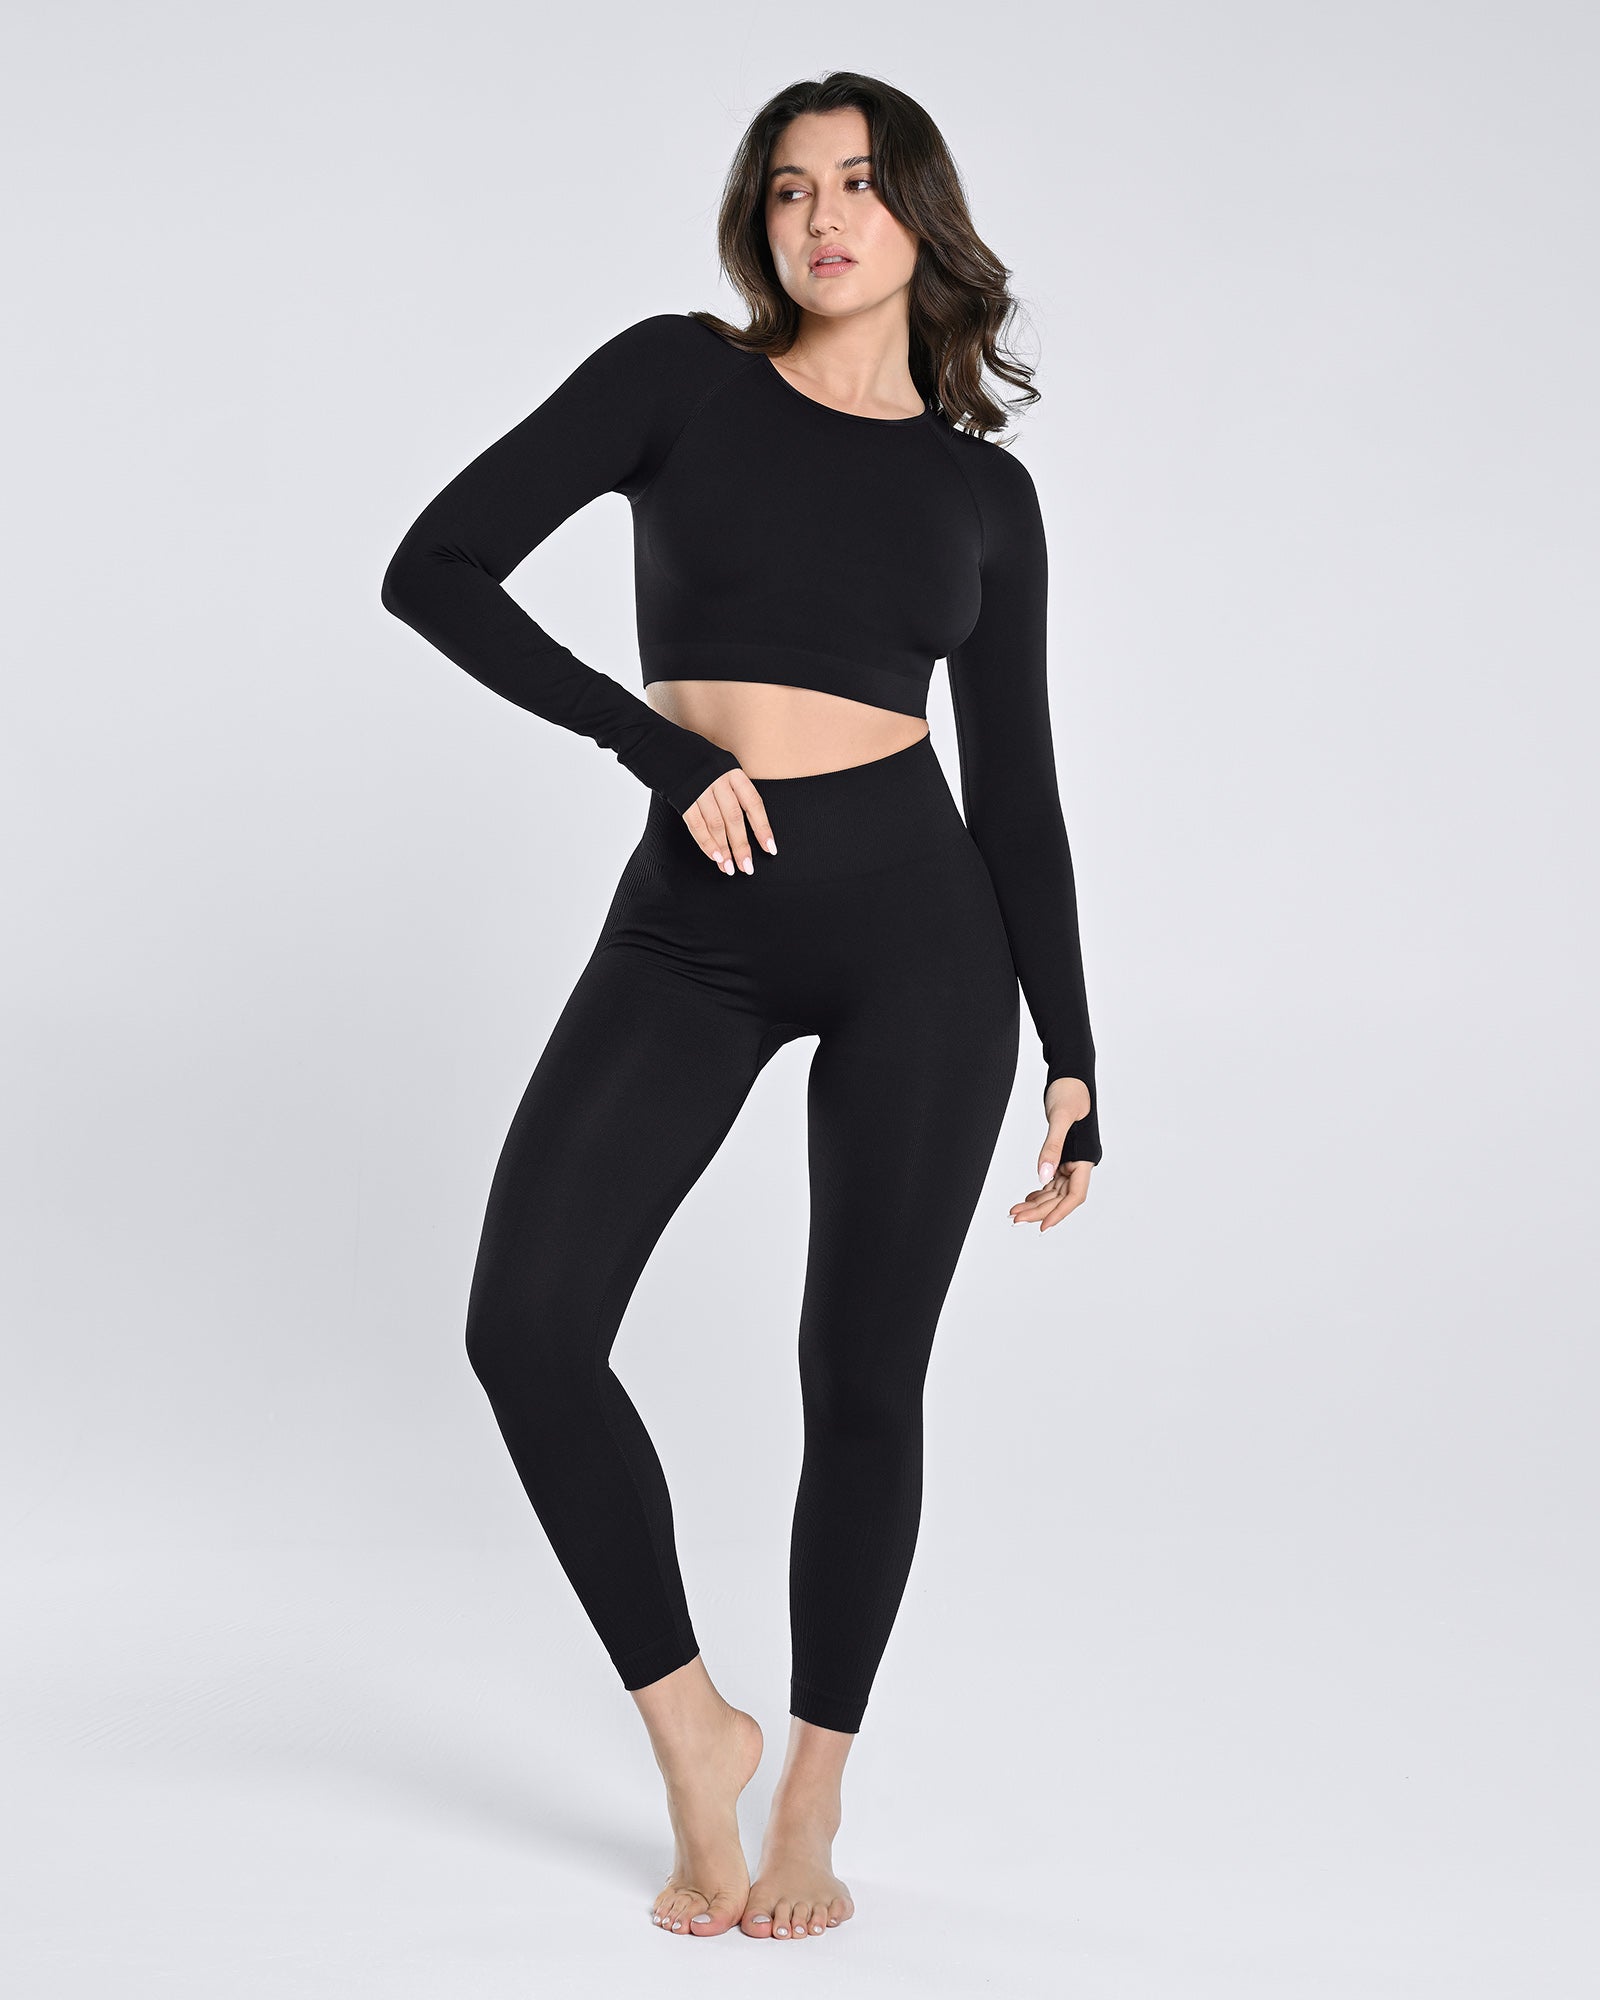 Thriftwithkellyann - Climawear athletic leggings. Size XL but work best for  a 6/8 IMO. Super stretchy, high waisted, nice thick material so no underwear  lines. Well made. These retail for $58. In